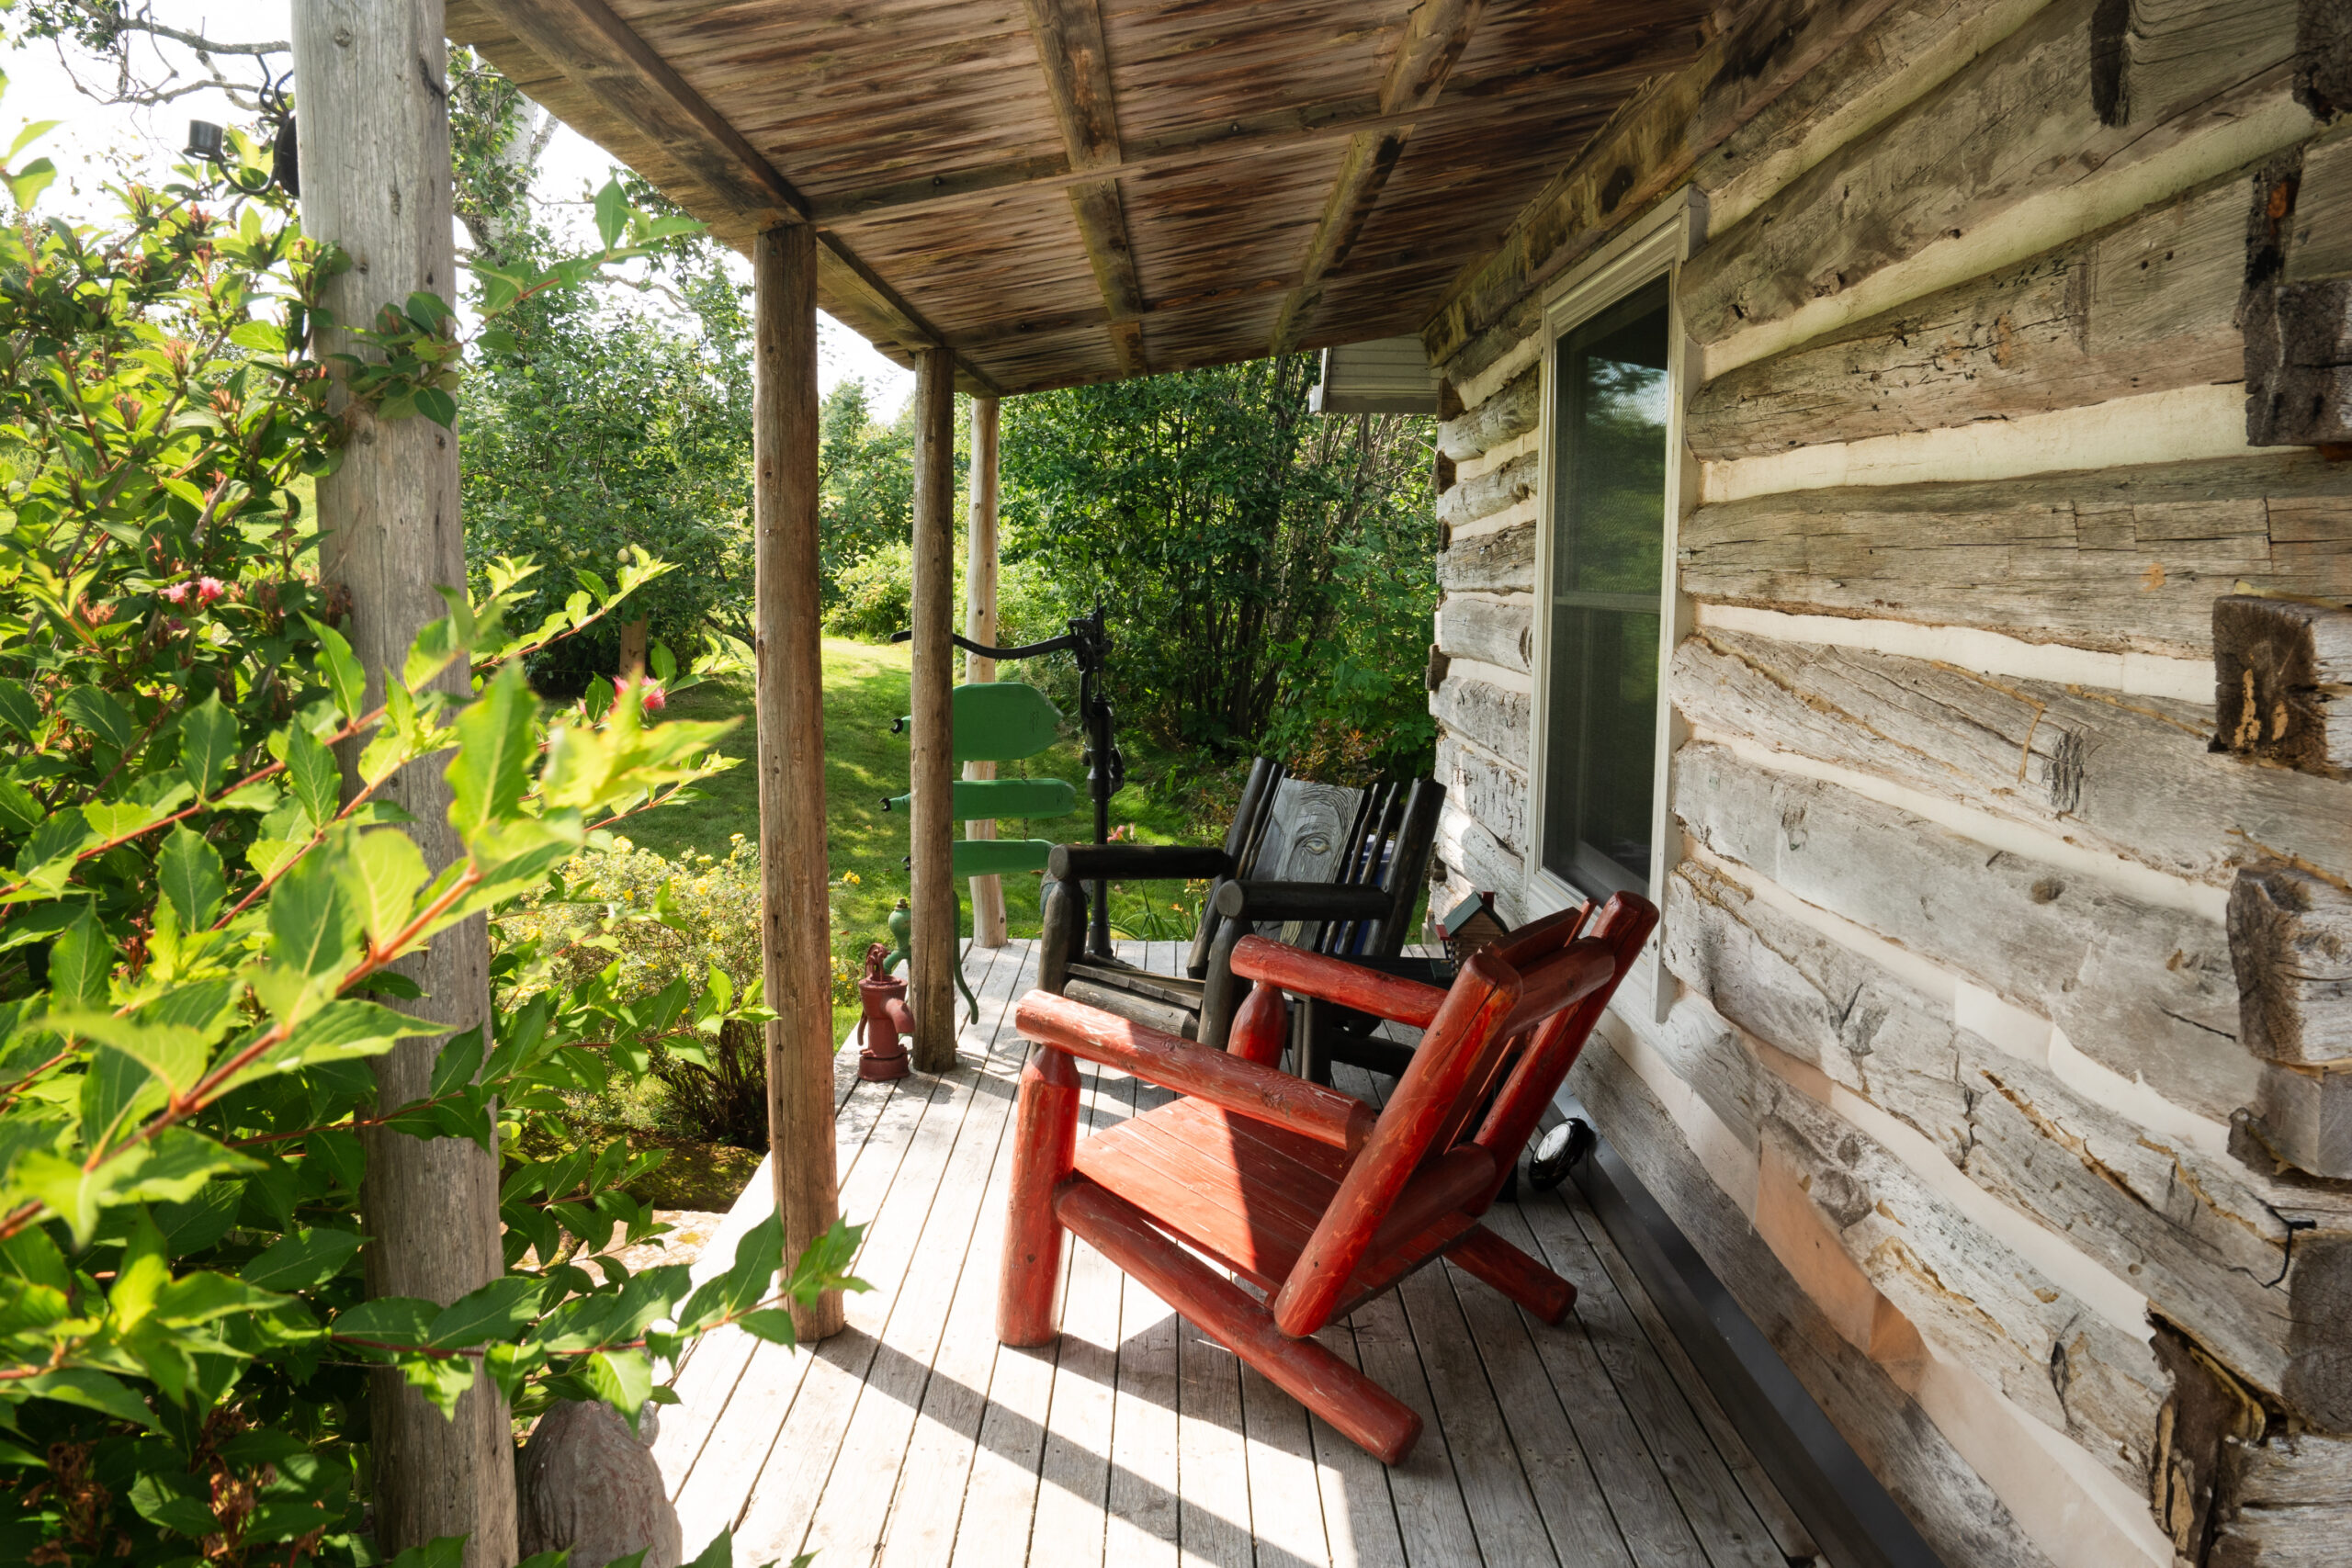 A covered porch on a small log cabin, with two Muskoka-style chairs.